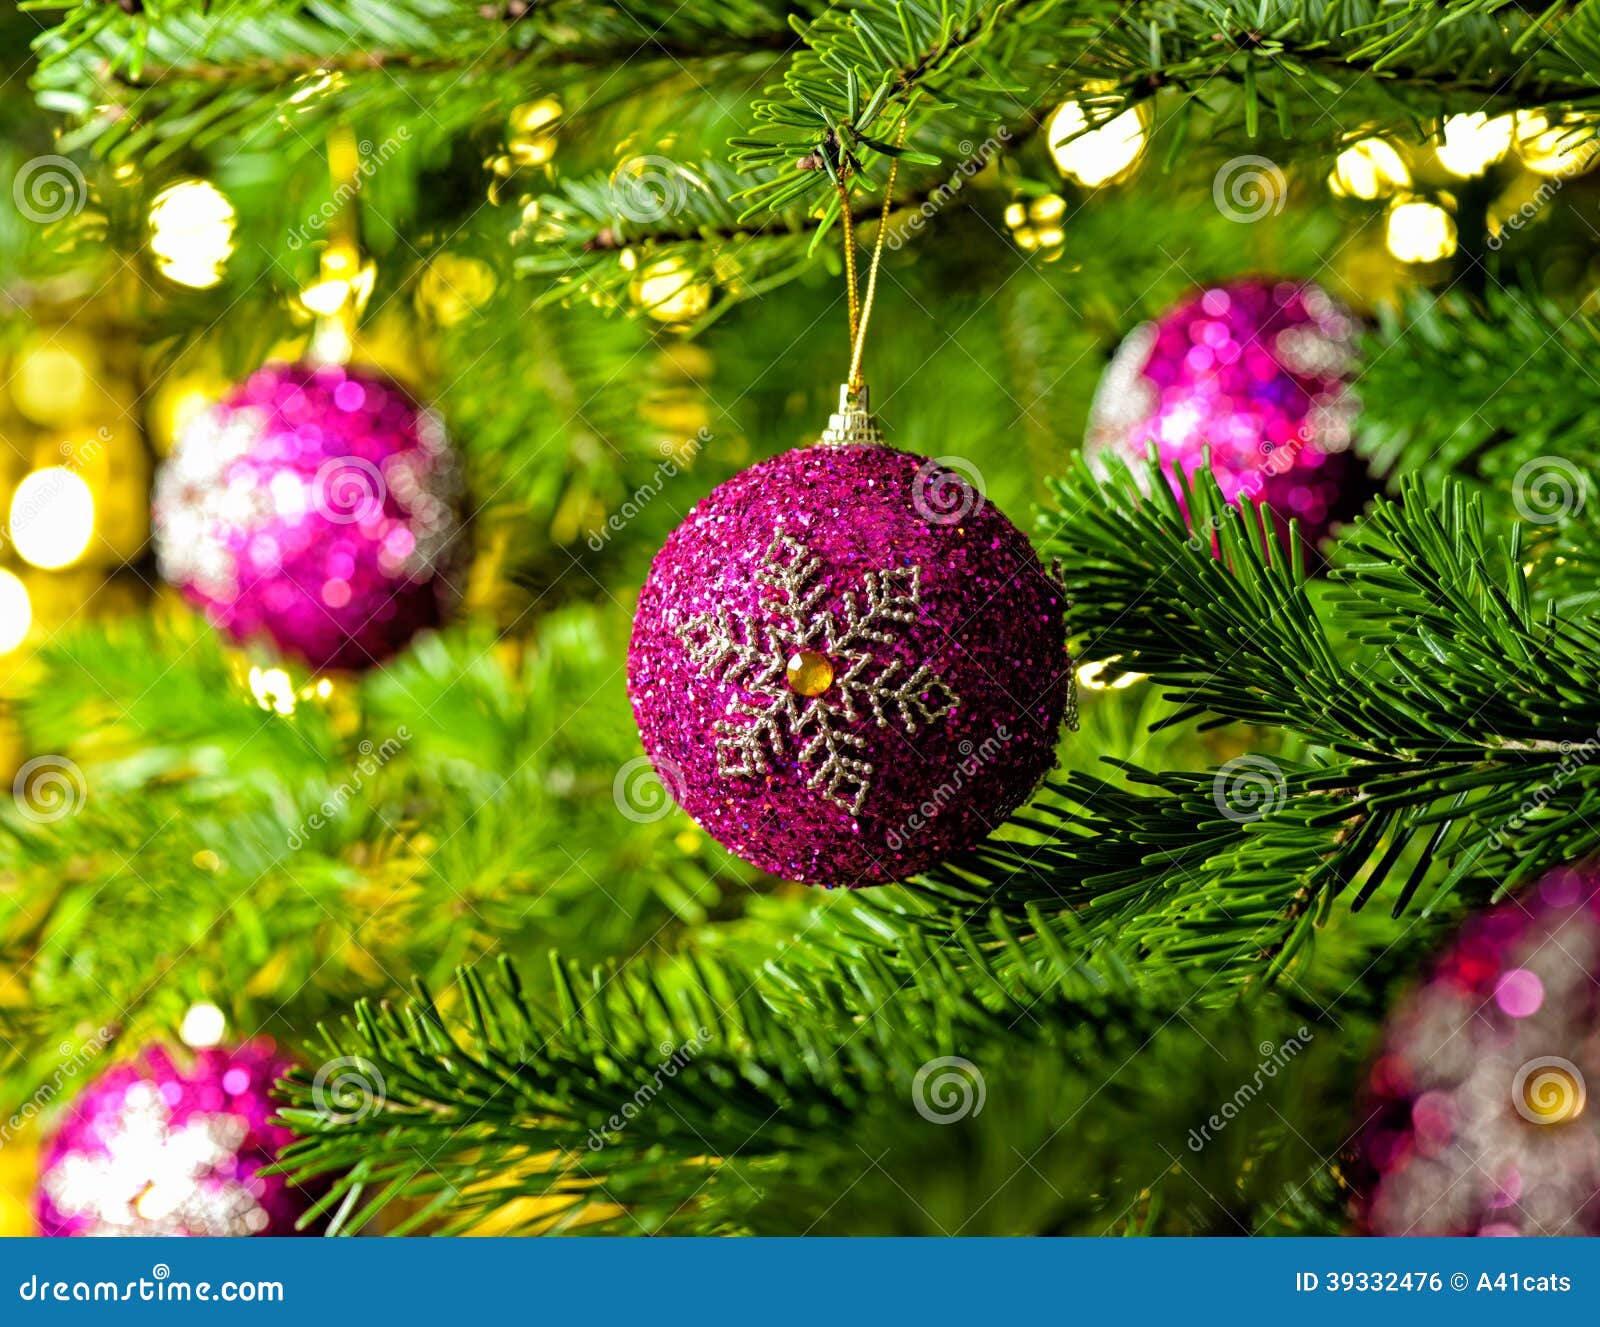 Ornament in a Christmas Tree Stock Photo - Image of ornaments ...